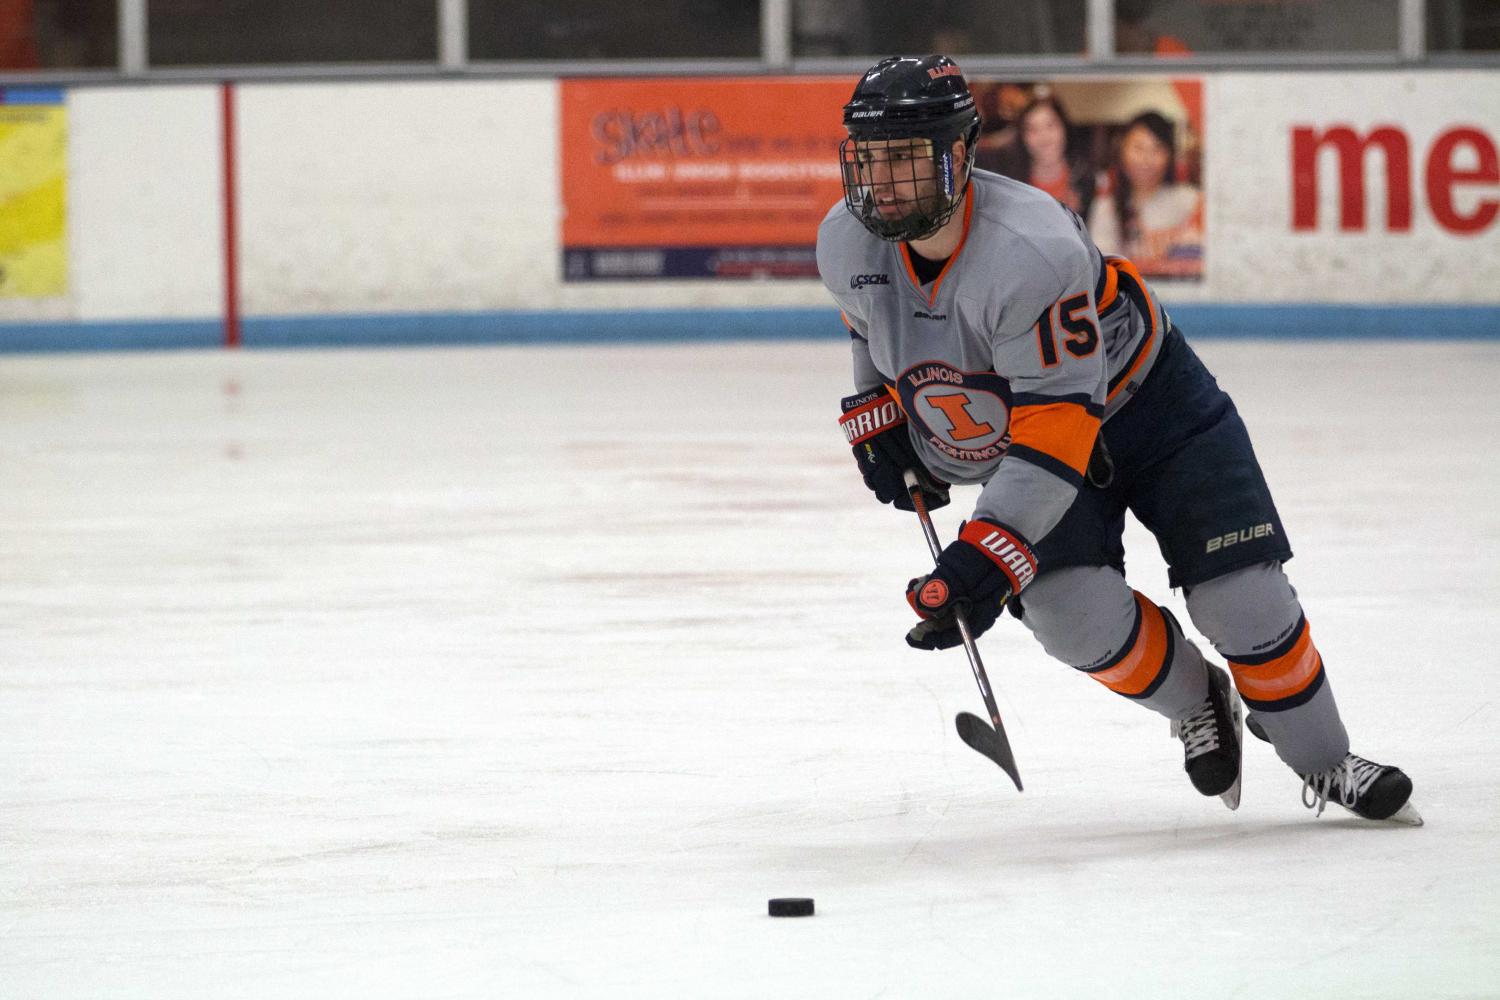 Eric Cruickshank gains possession of the puck and takes it up the ice to Robert Morris’ zone on Feb. 18. Illinois fell to Robert Morris 3-2. The team holds optimism for next season.